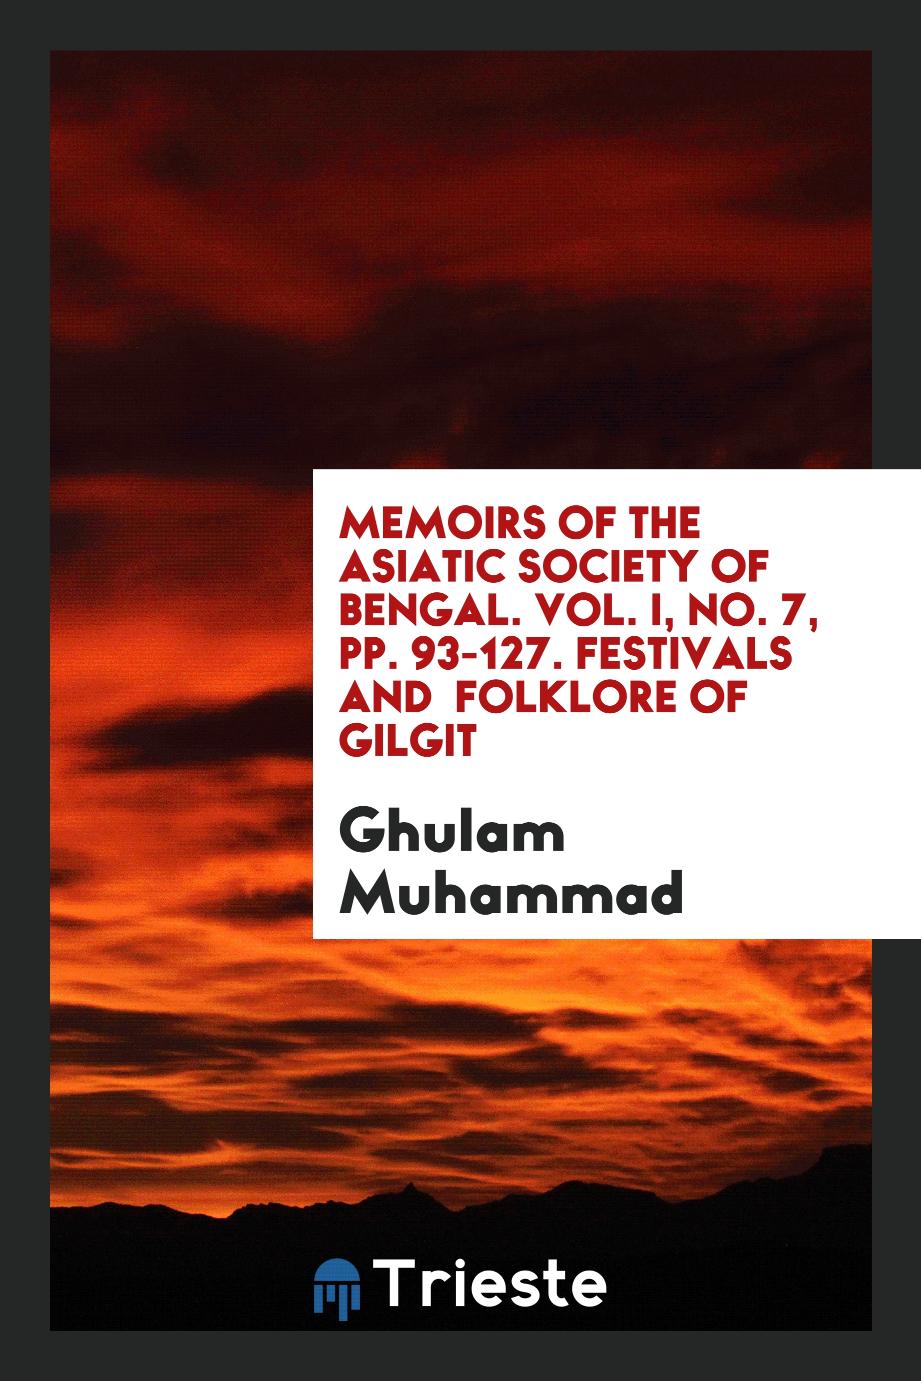 Memoirs of the Asiatic Society of Bengal. Vol. I, No. 7, pp. 93-127. Festivals and Folklore of Gilgit